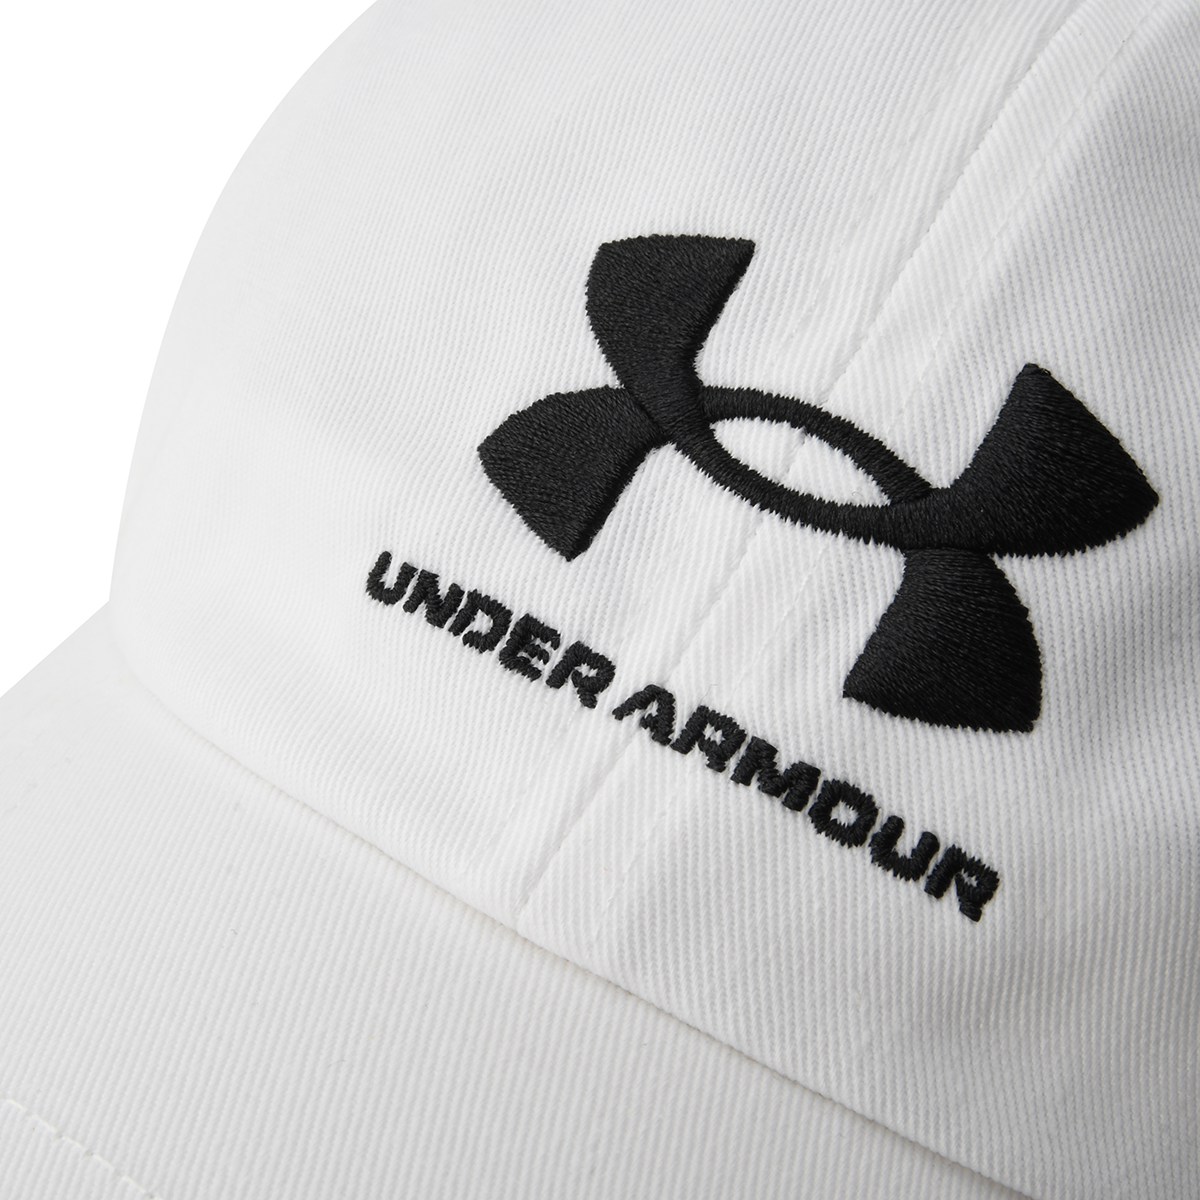 Gorra Under Armour Favorites,  image number null